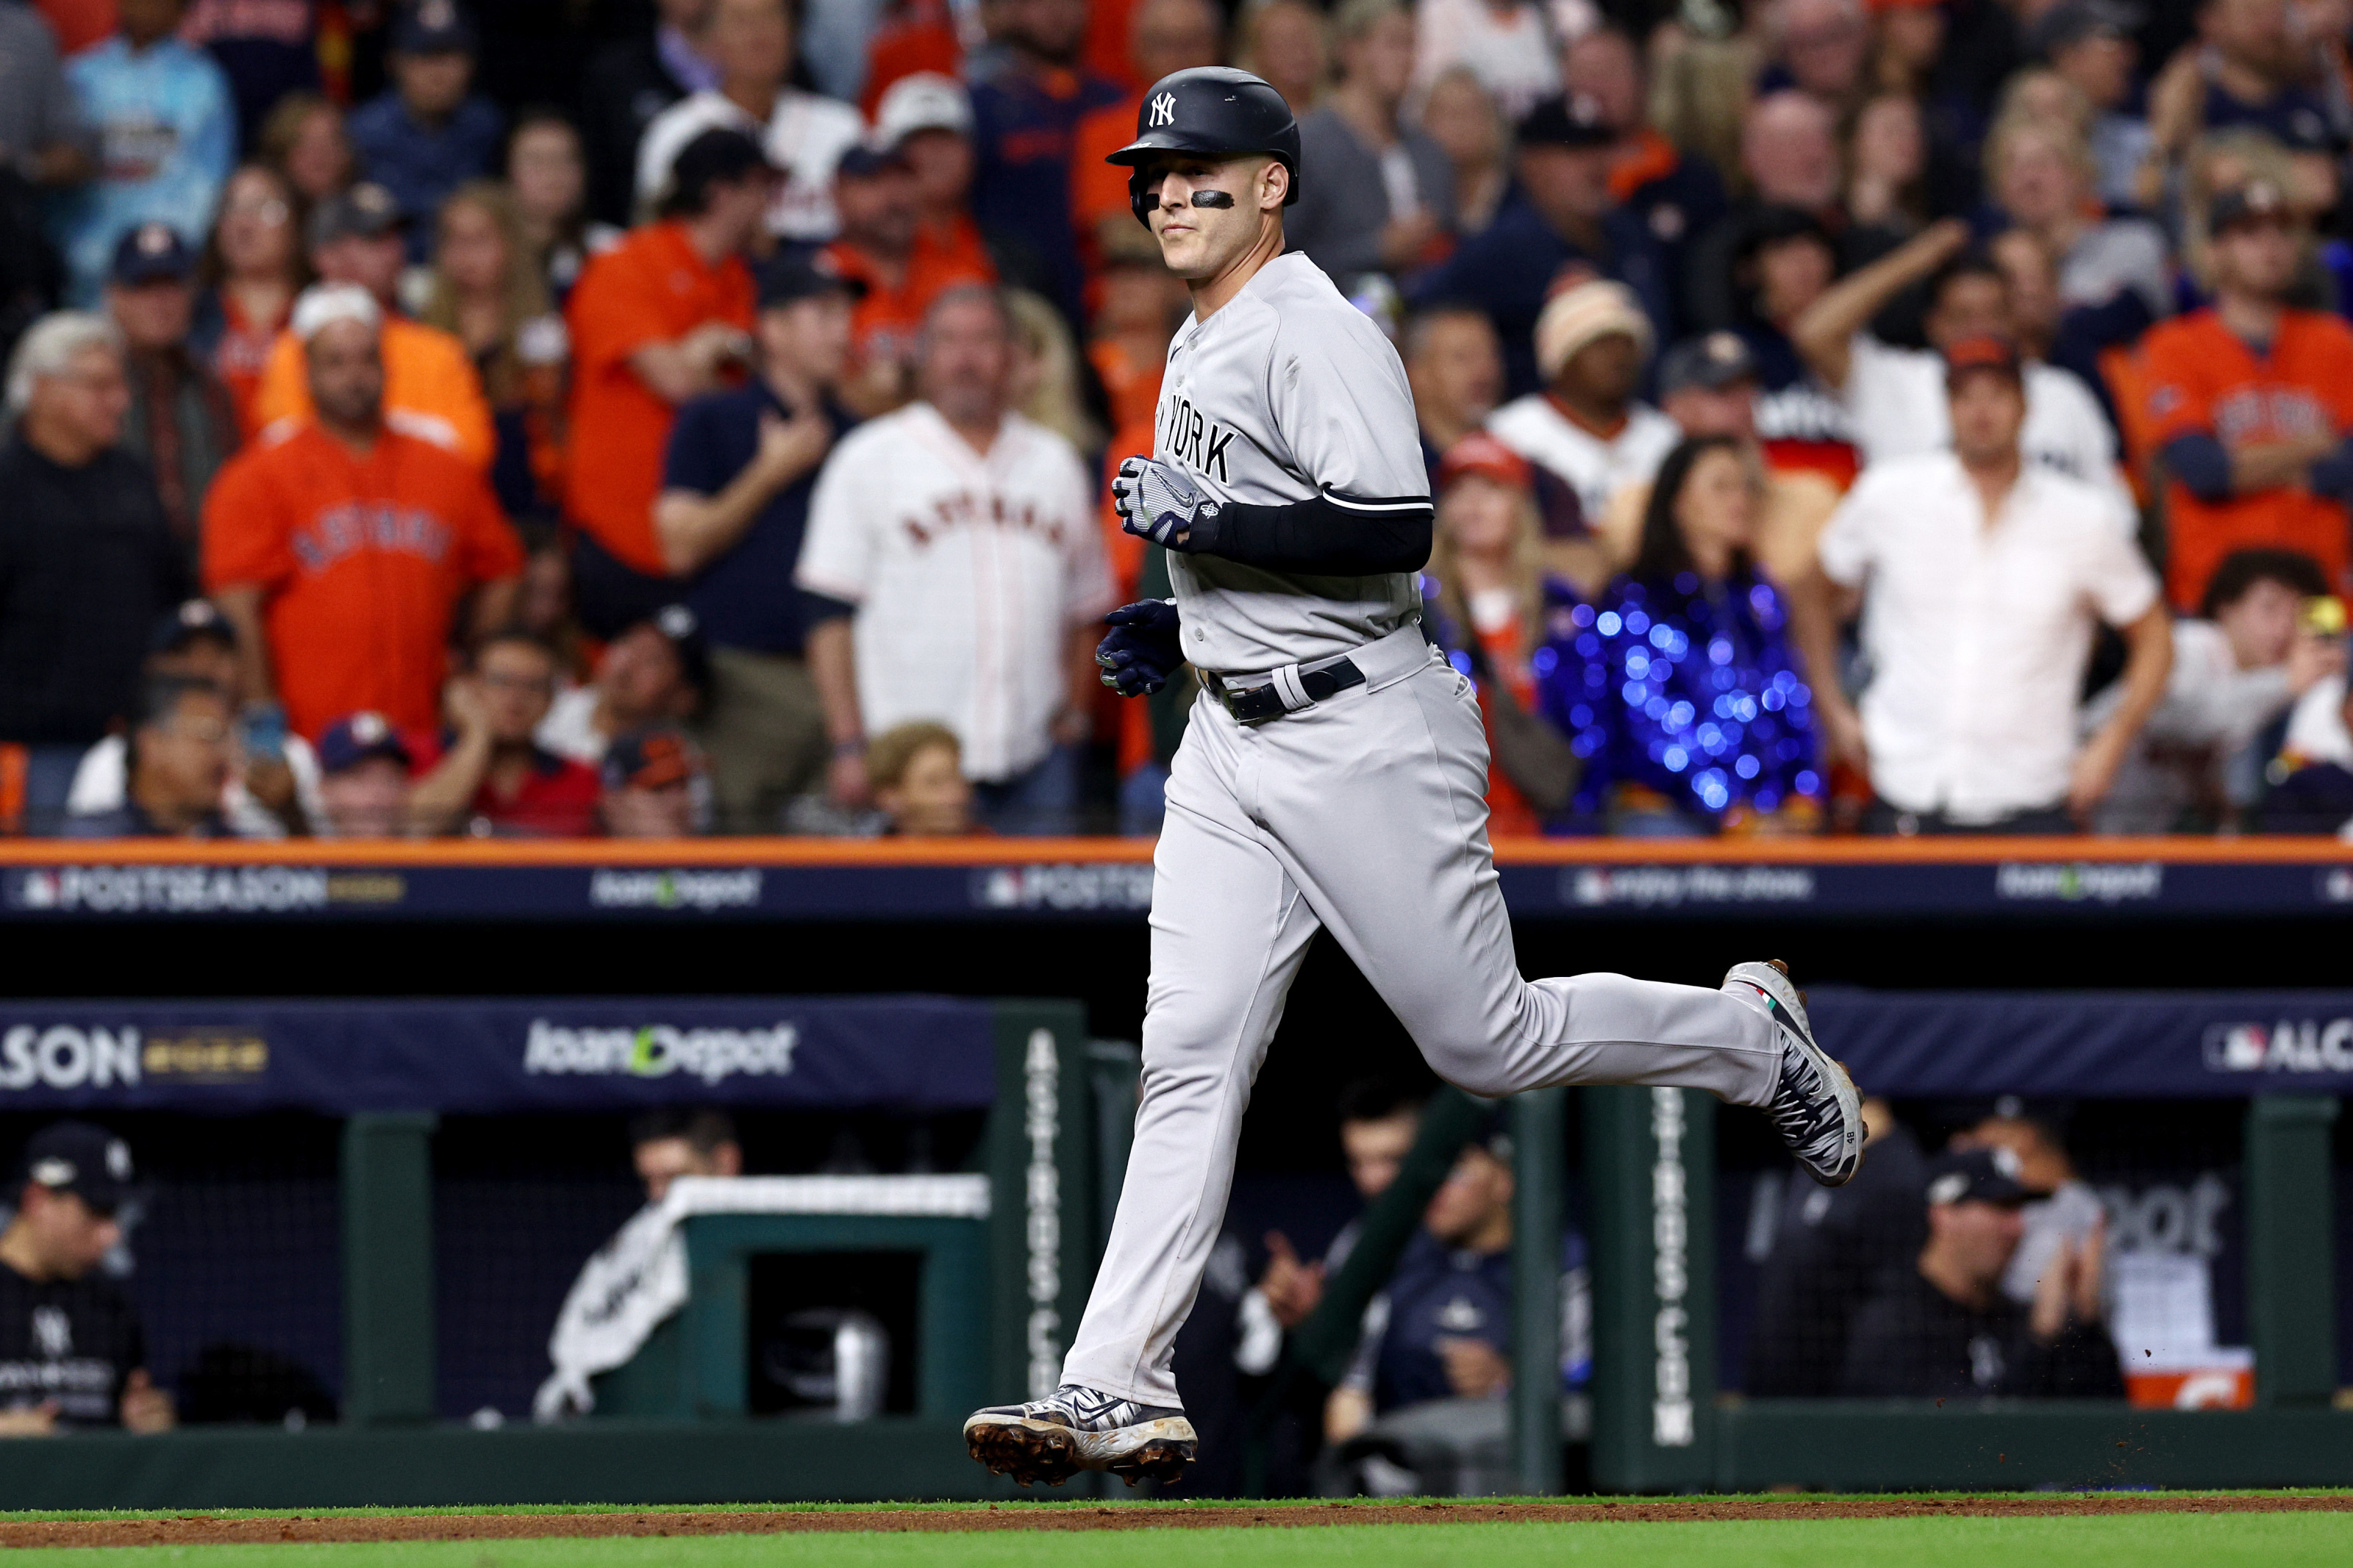 Cubs: Anthony Rizzo's ALCS home run comes in Yankees loss